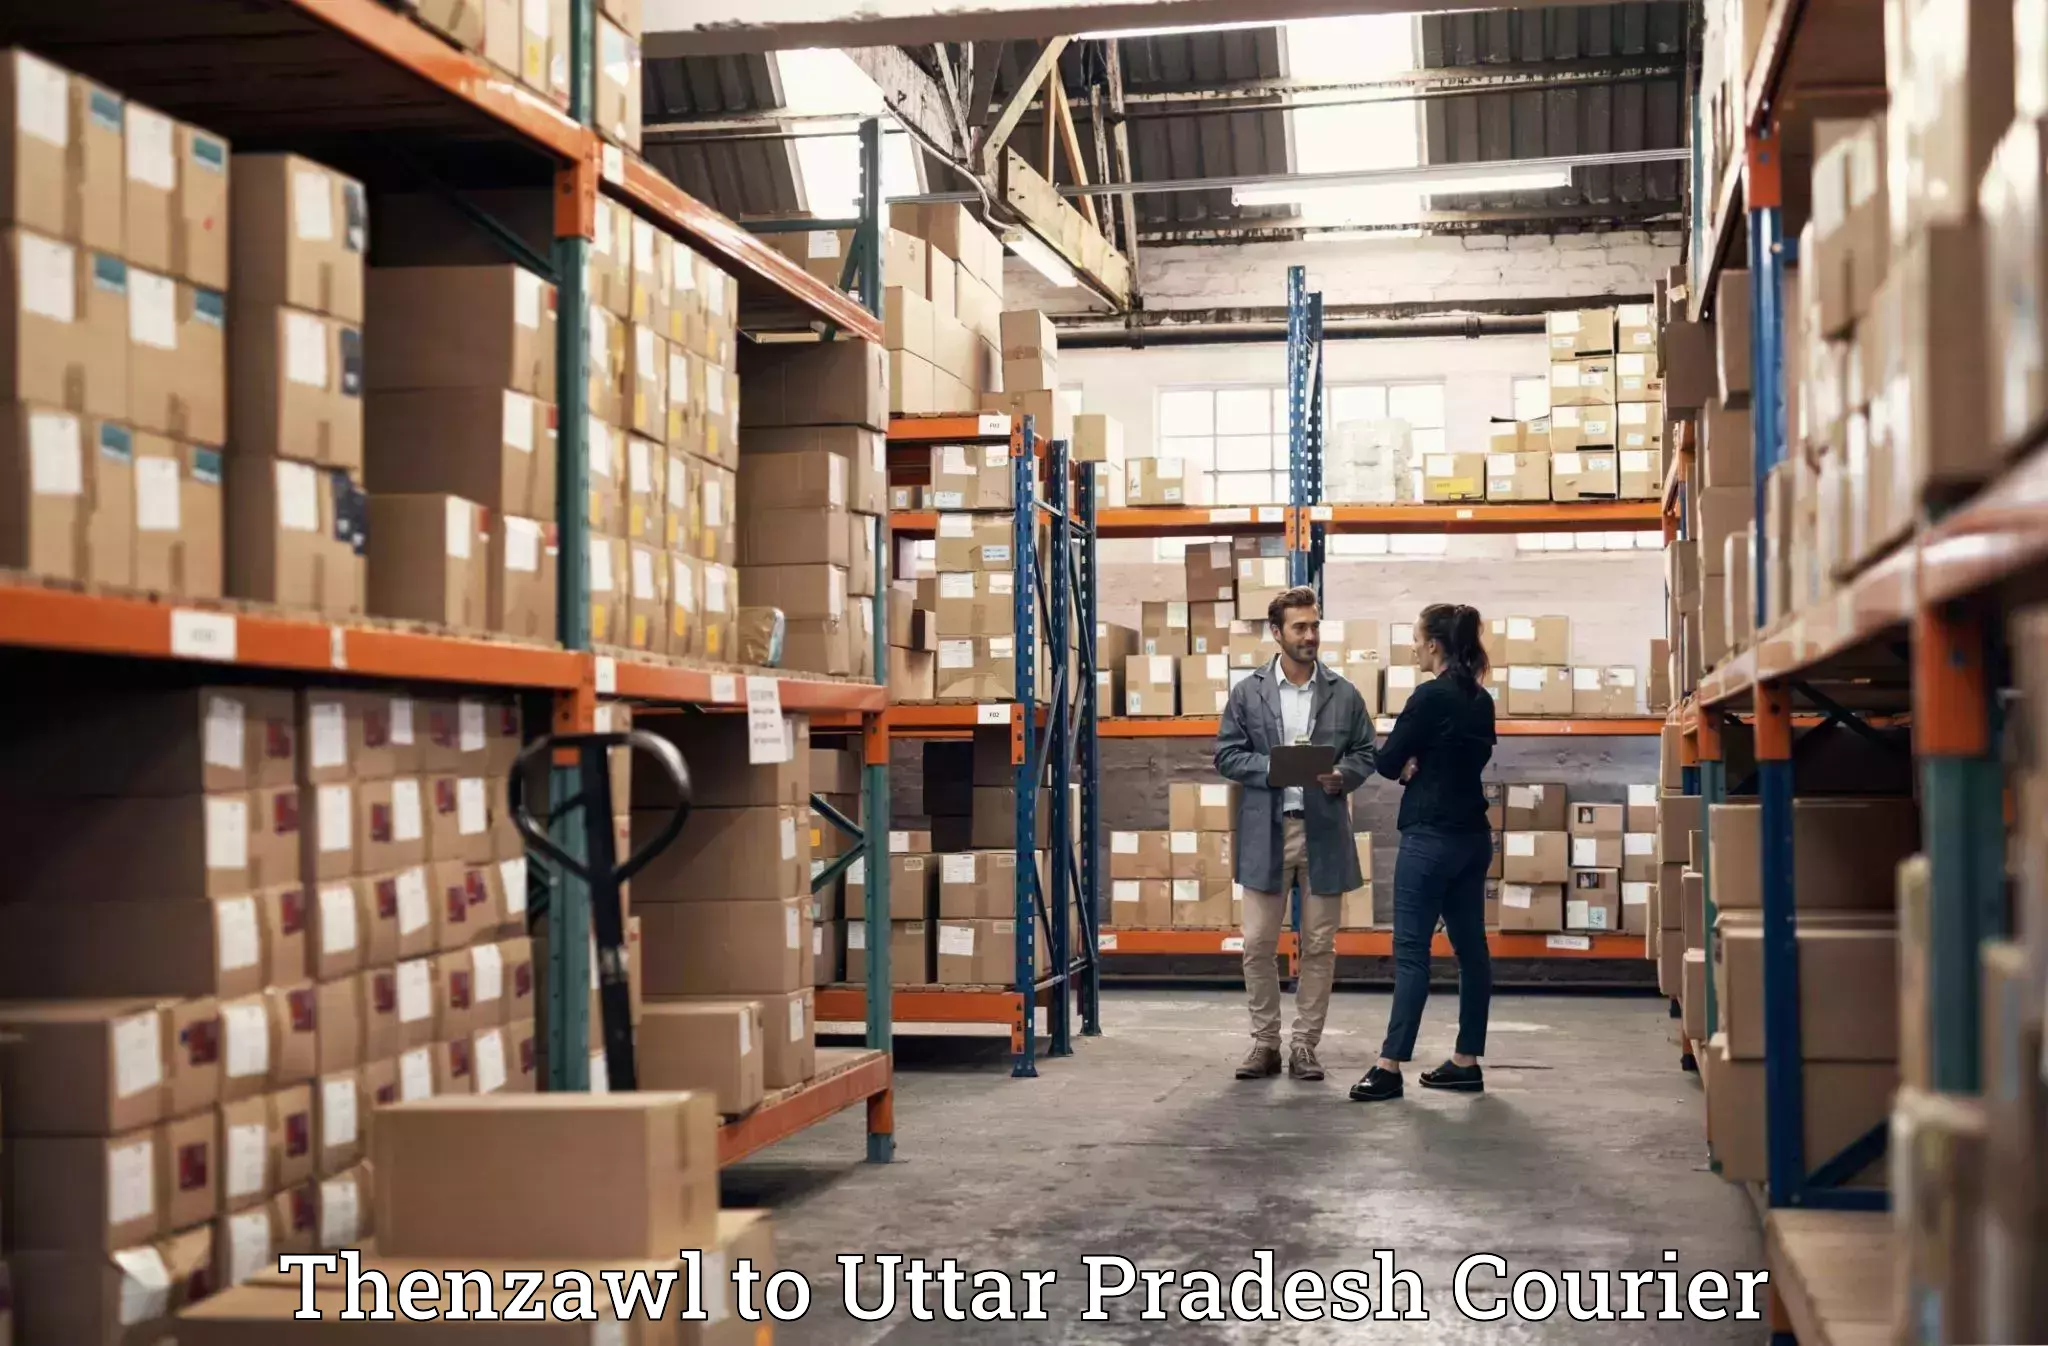 Furniture relocation experts Thenzawl to Saharanpur